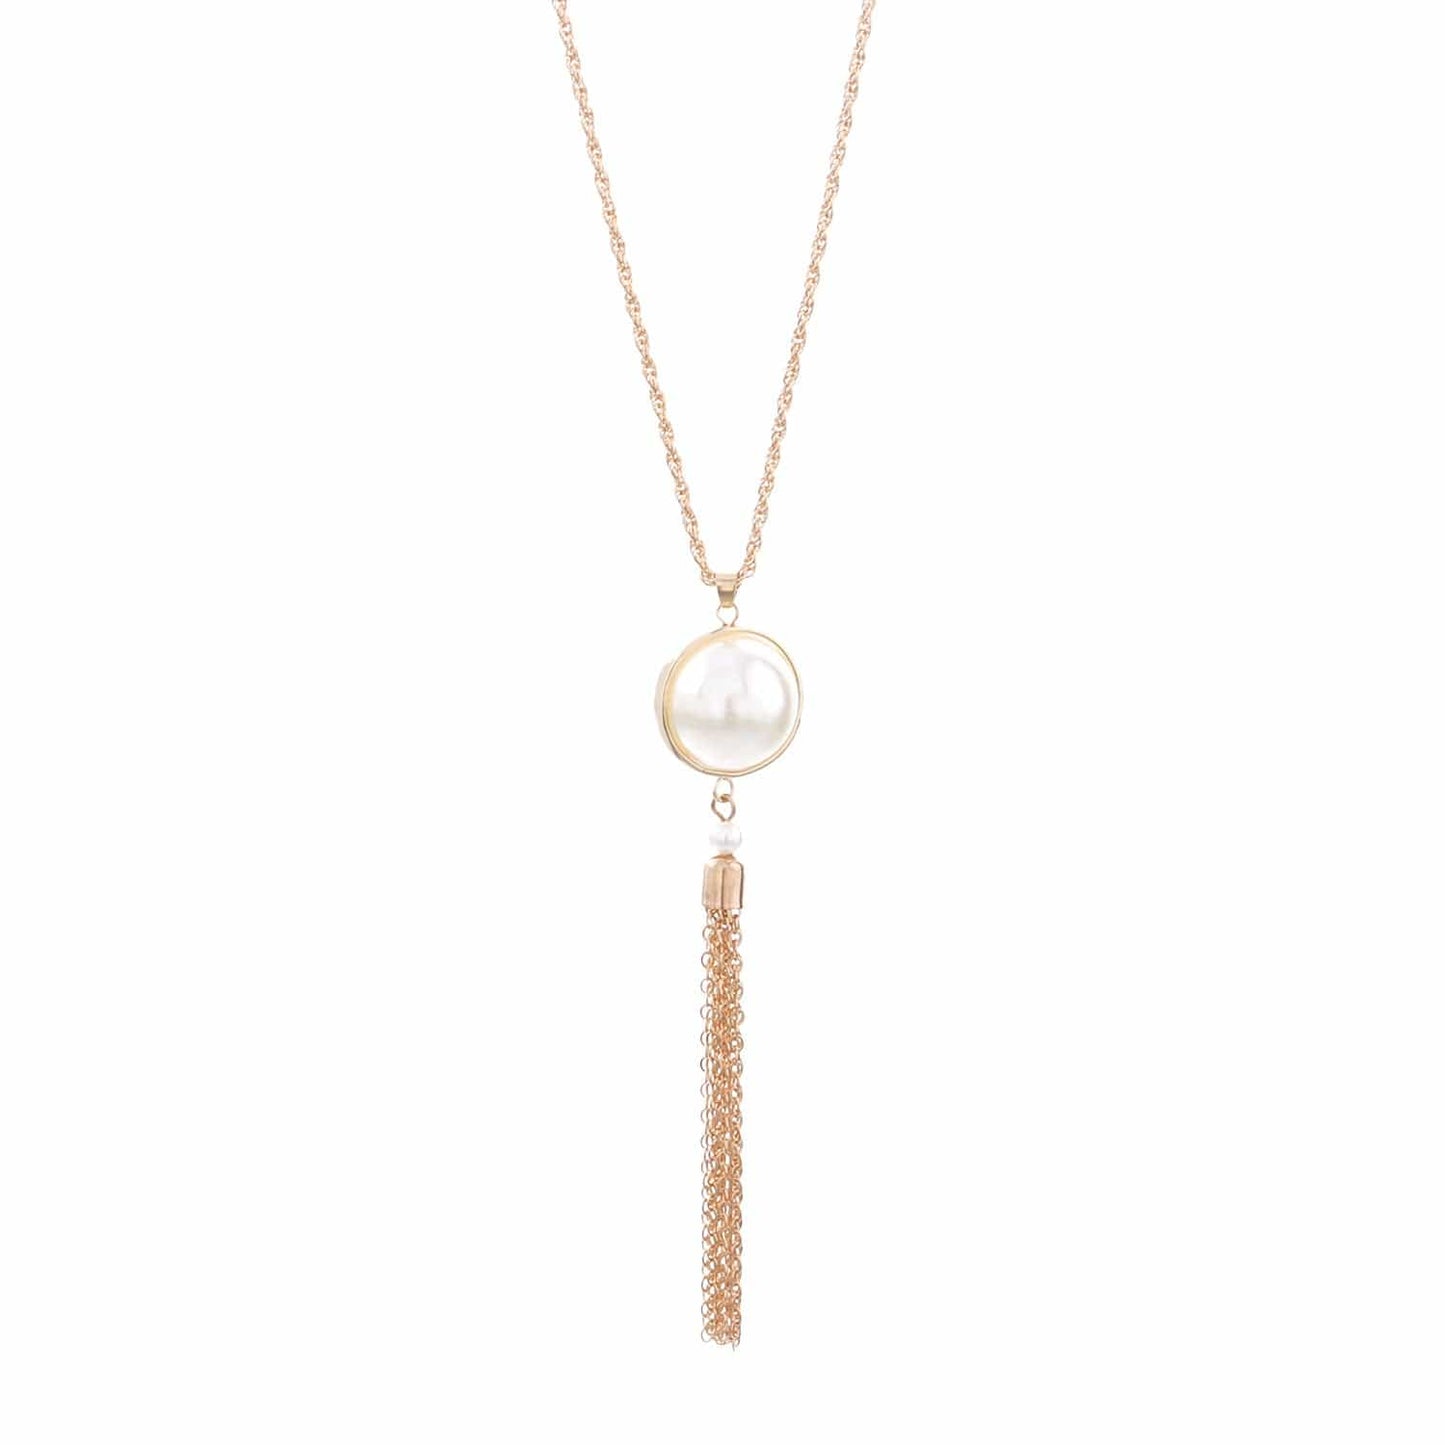 JuJumoose Simple knotted tassel long sweater necklace